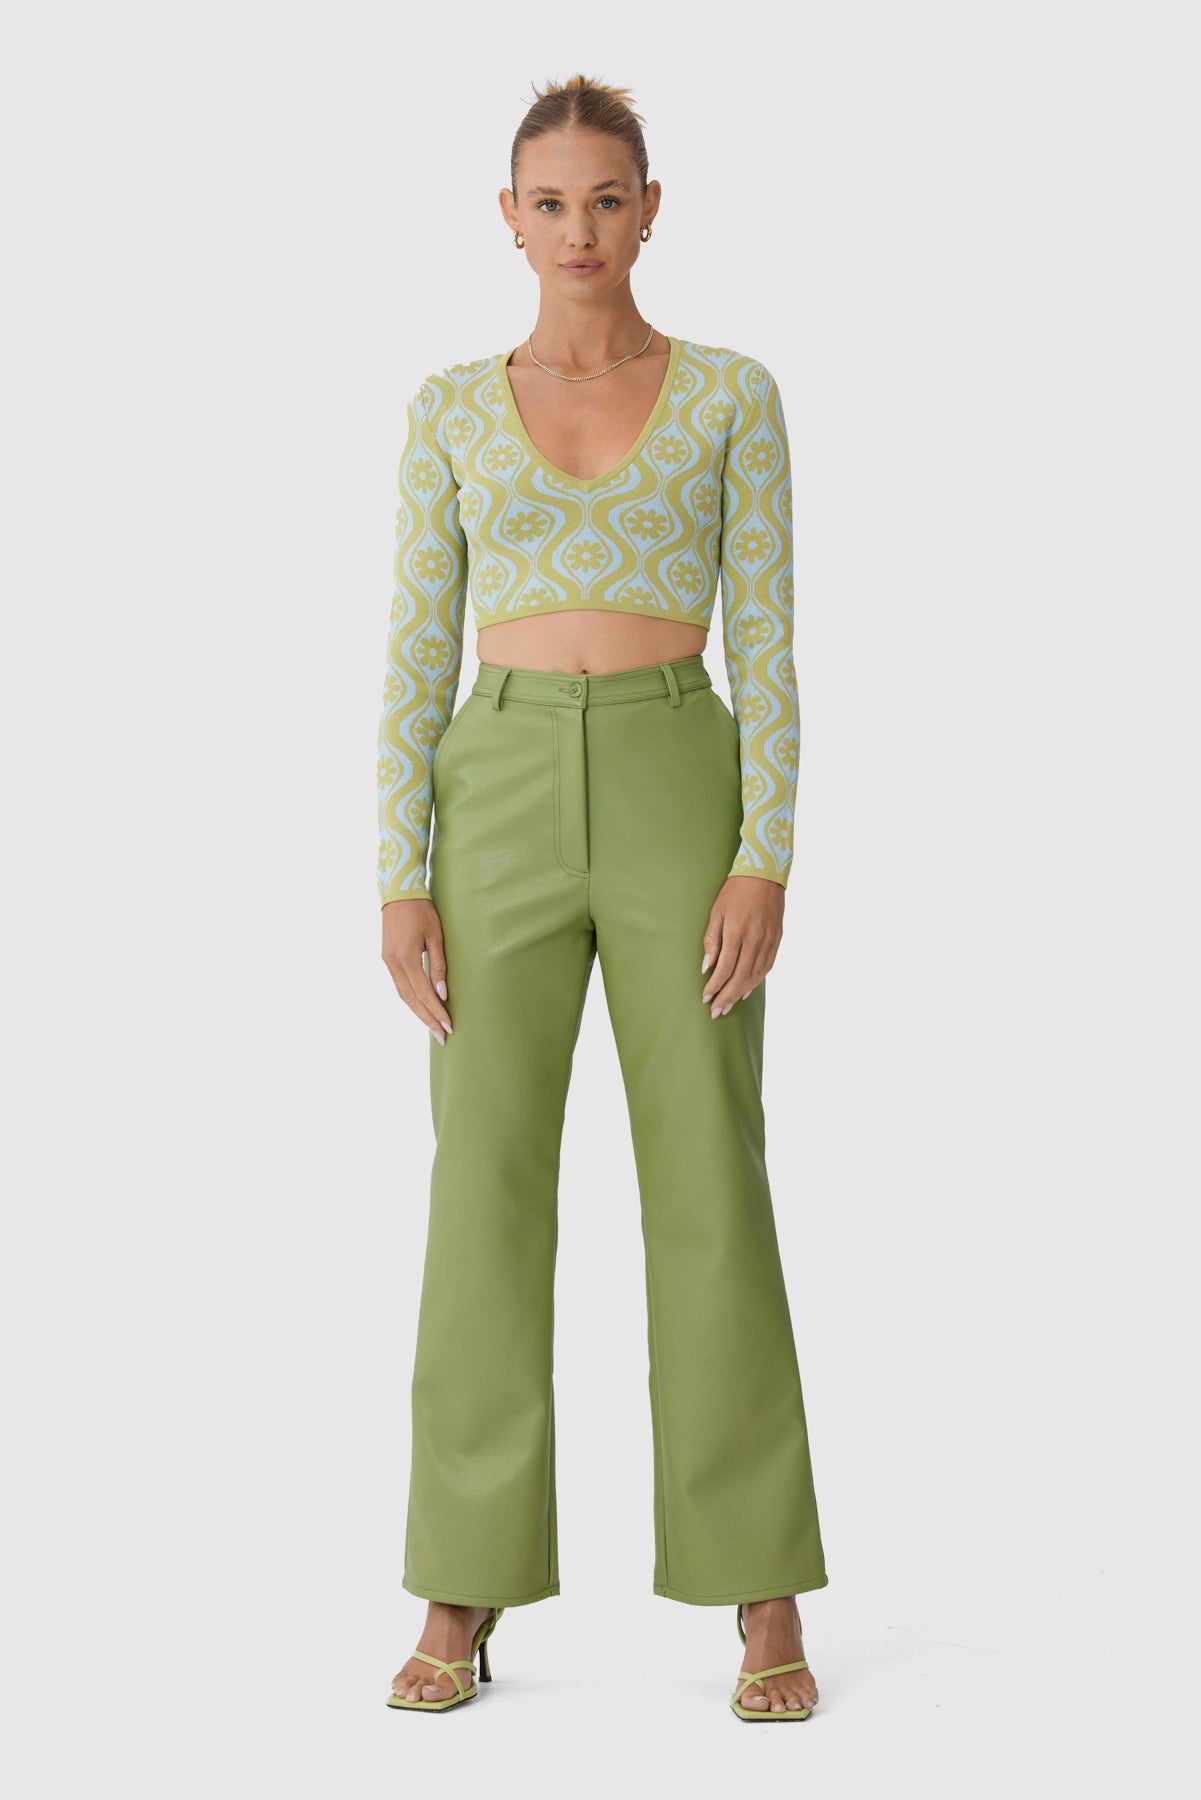 Finders - Quinn Ls Knit Top - Lime Retro Floral